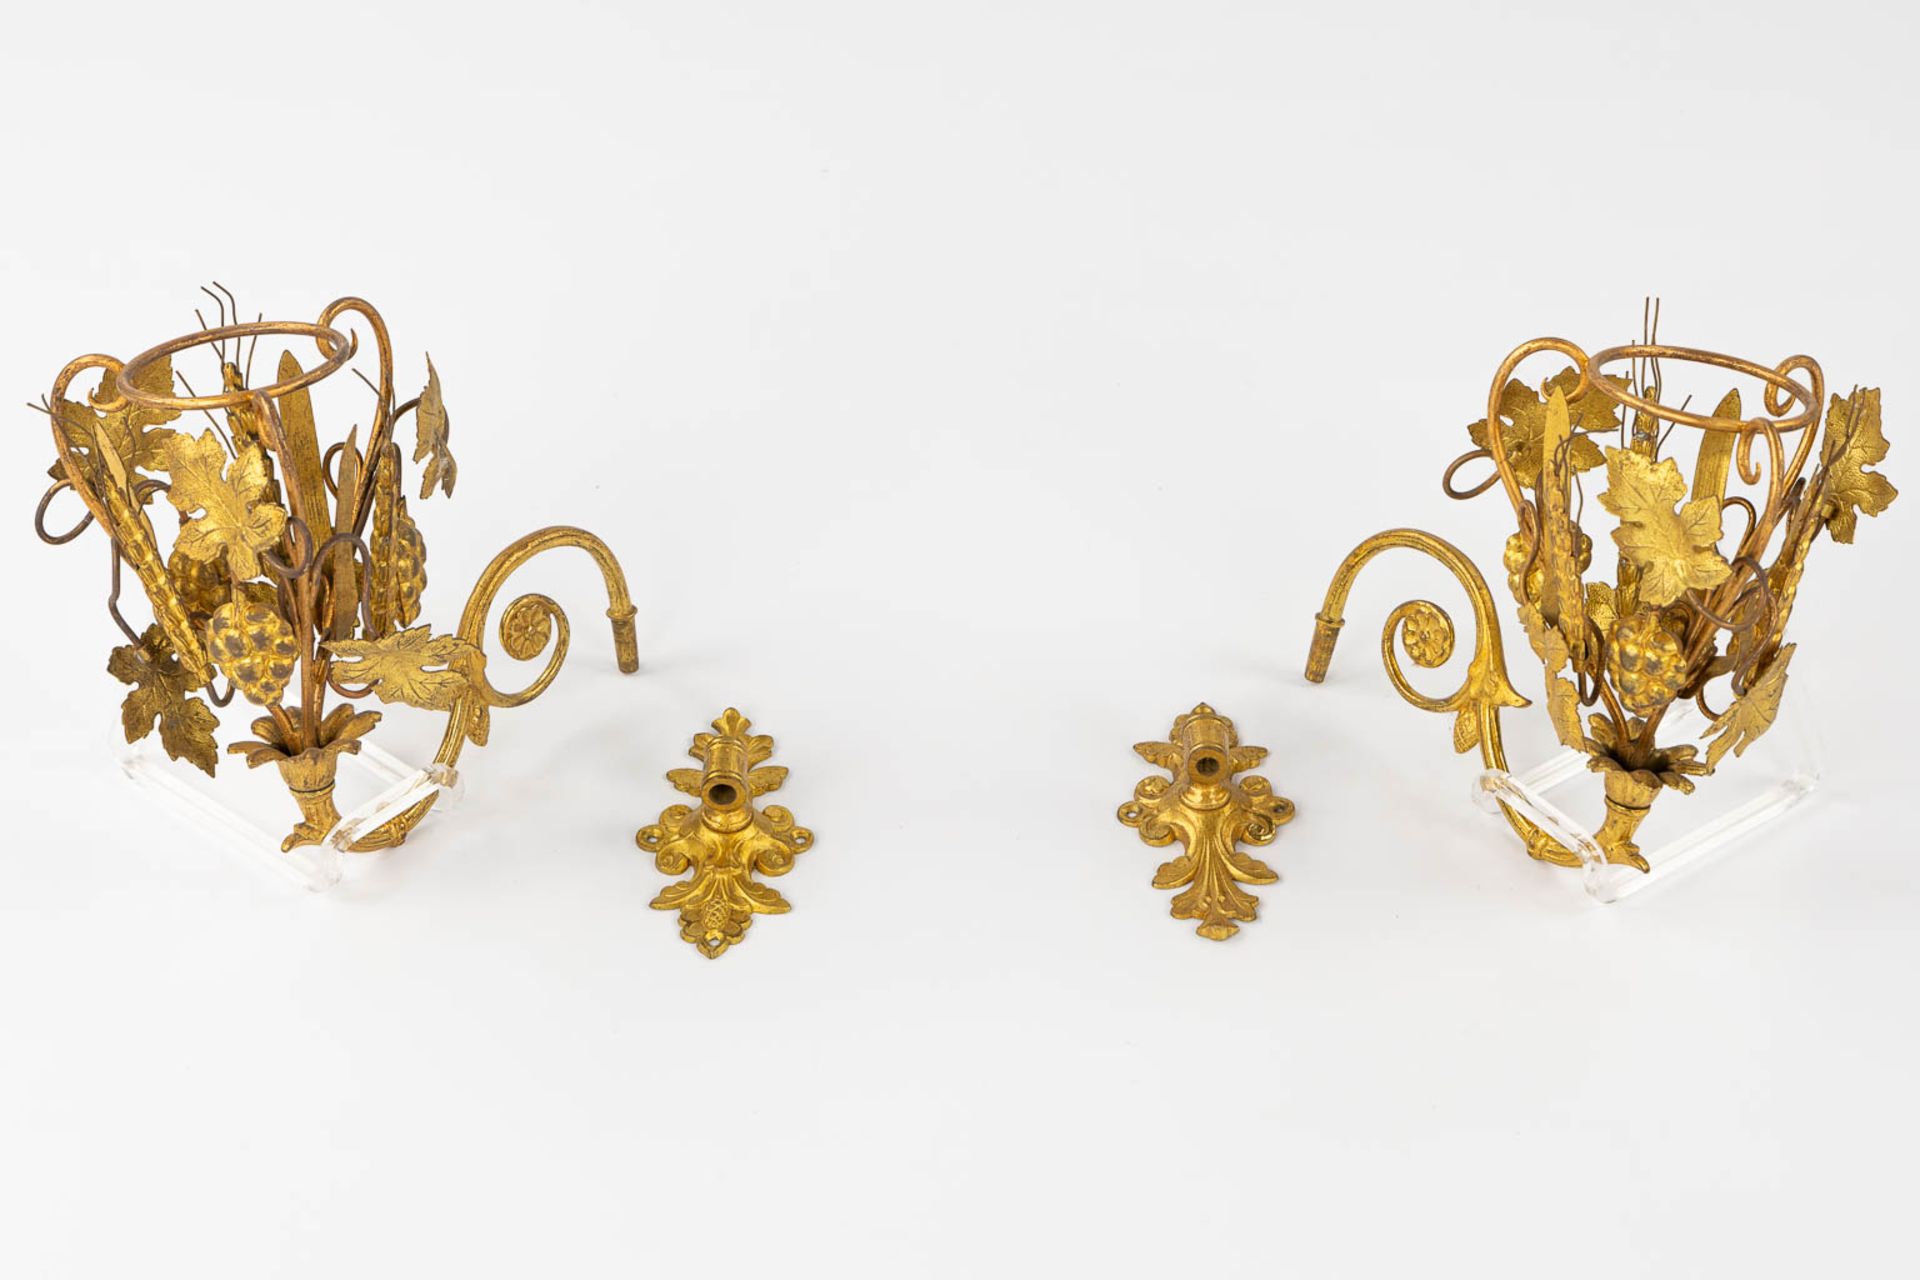 Two pairs of Church Candelabra and a pair of wall-mounted candelabra, Gilt metal decorated with whea - Image 3 of 16